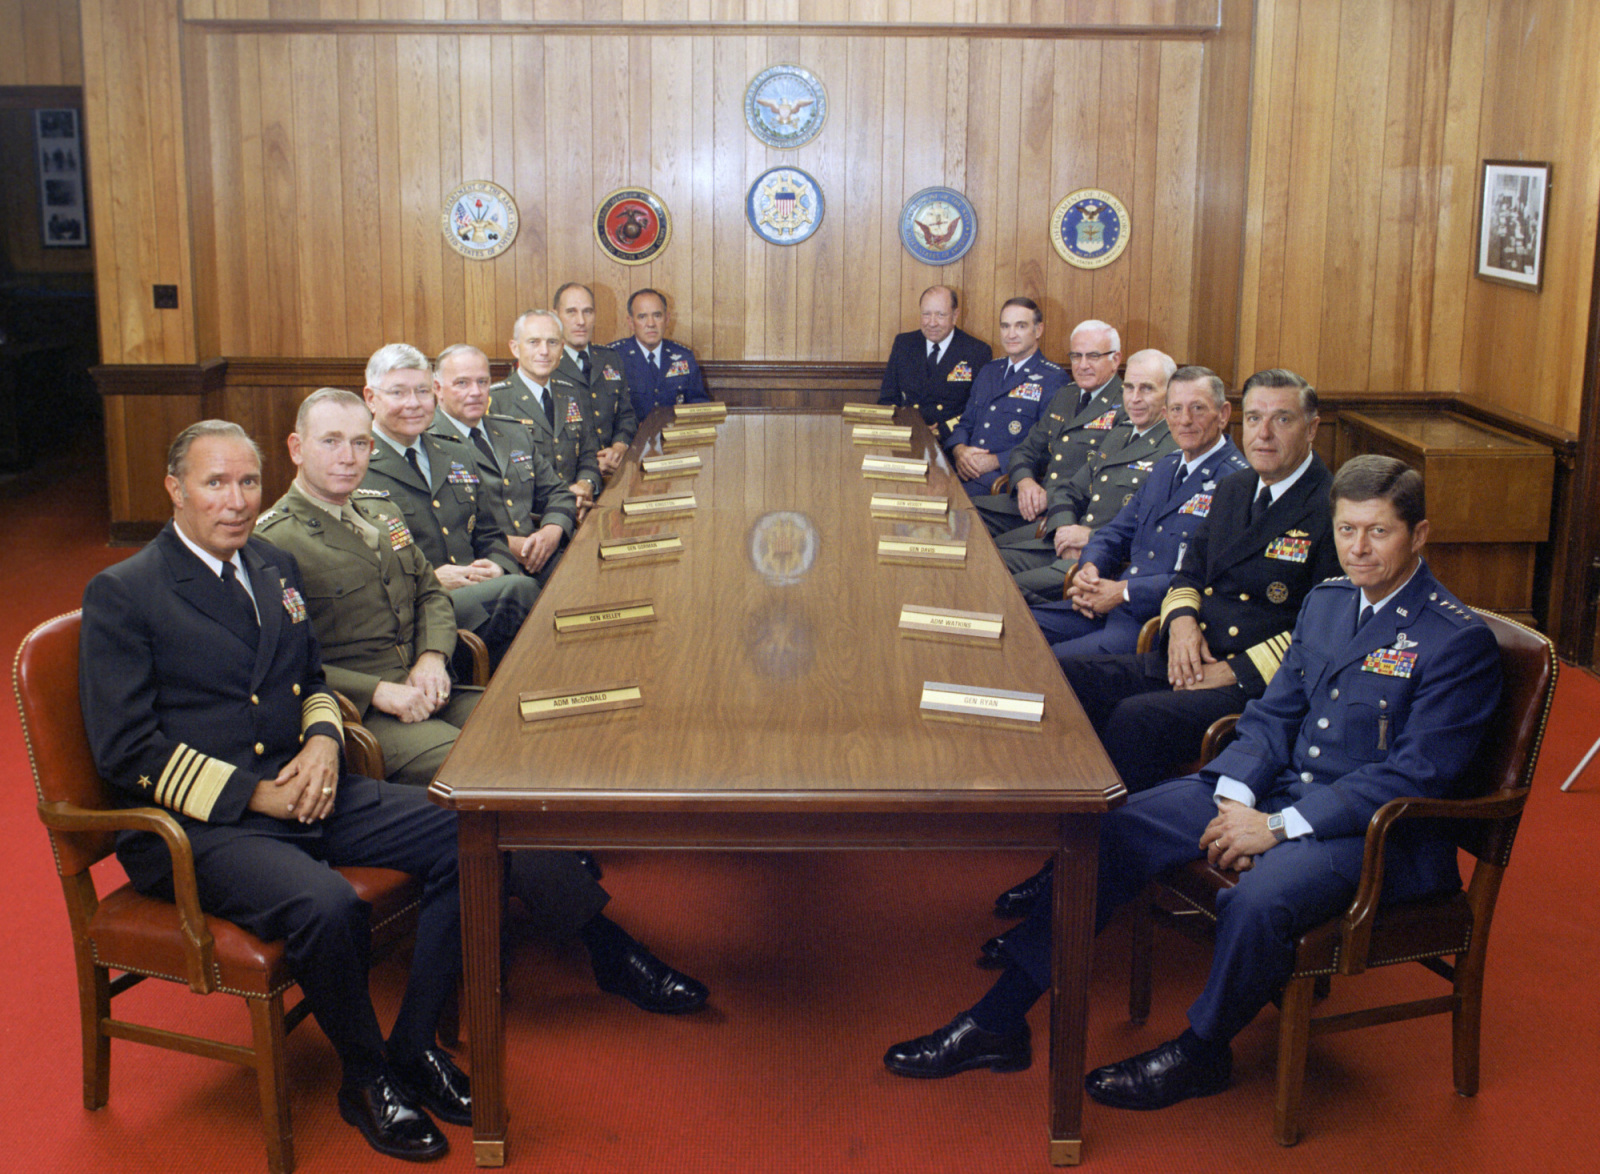 From Michael Moore's documentary, Where To Invade Next: This is a group photograph of the Joint Chiefs of Staff and several Commanders in Chiefs taken on July 1, 1983, in the Chairman of the Joint Chiefs of Staff dining room, located in the Pentagon. Shows (left to right): U.S. Navy Adm. Wesley L. McDonald, Commander in Chief, US Atlantic Command; U.S. Marine Corps Gen. Paul X. Kelley, Commandant of the Marine Corps; U.S. Army Gen. Paul F. Gorman, Commander in Chief, US Southern Command; U.S. Army Lt. Gen. Robert C. Kingston, Commander in Chief, US Central Command; U.S. Army Gen. John A. Wickham, Chief of Staff, US Army; U.S. Army Gen. Wallace H. Nutting, Commander in Chief, US Readiness Command; U.S. Air Force Gen. James V. Hartinger, Commander in Chief, Aerospace Defense Command; U.S. Navy Adm. William J. Crowe, Commander in Chief, US Pacific Command; U.S. Air Force Gen. Charles A. Gabriel, Chief of Staff, U.S. Air Force; U.S. Army Bernard W. Rogers, Commander in Chief, US European Command; U.S. Army Gen. John W. Vessey, Jr., Chairman of the Joint Chiefs of Staff; U.S. Air Force Gen. Bennie L. Davis, Commander in Chief, US Strategic Air Command; U.S. Navy Adm. James D. Watkins, Chief of Naval Operations; and U.S. Air Force Gen. Thomas M. Ryan, Commander in Chief, Military Airlift Command.  OSD Package No. A07D-00347 (DOD Photo by Robert D. Ward) (Released)